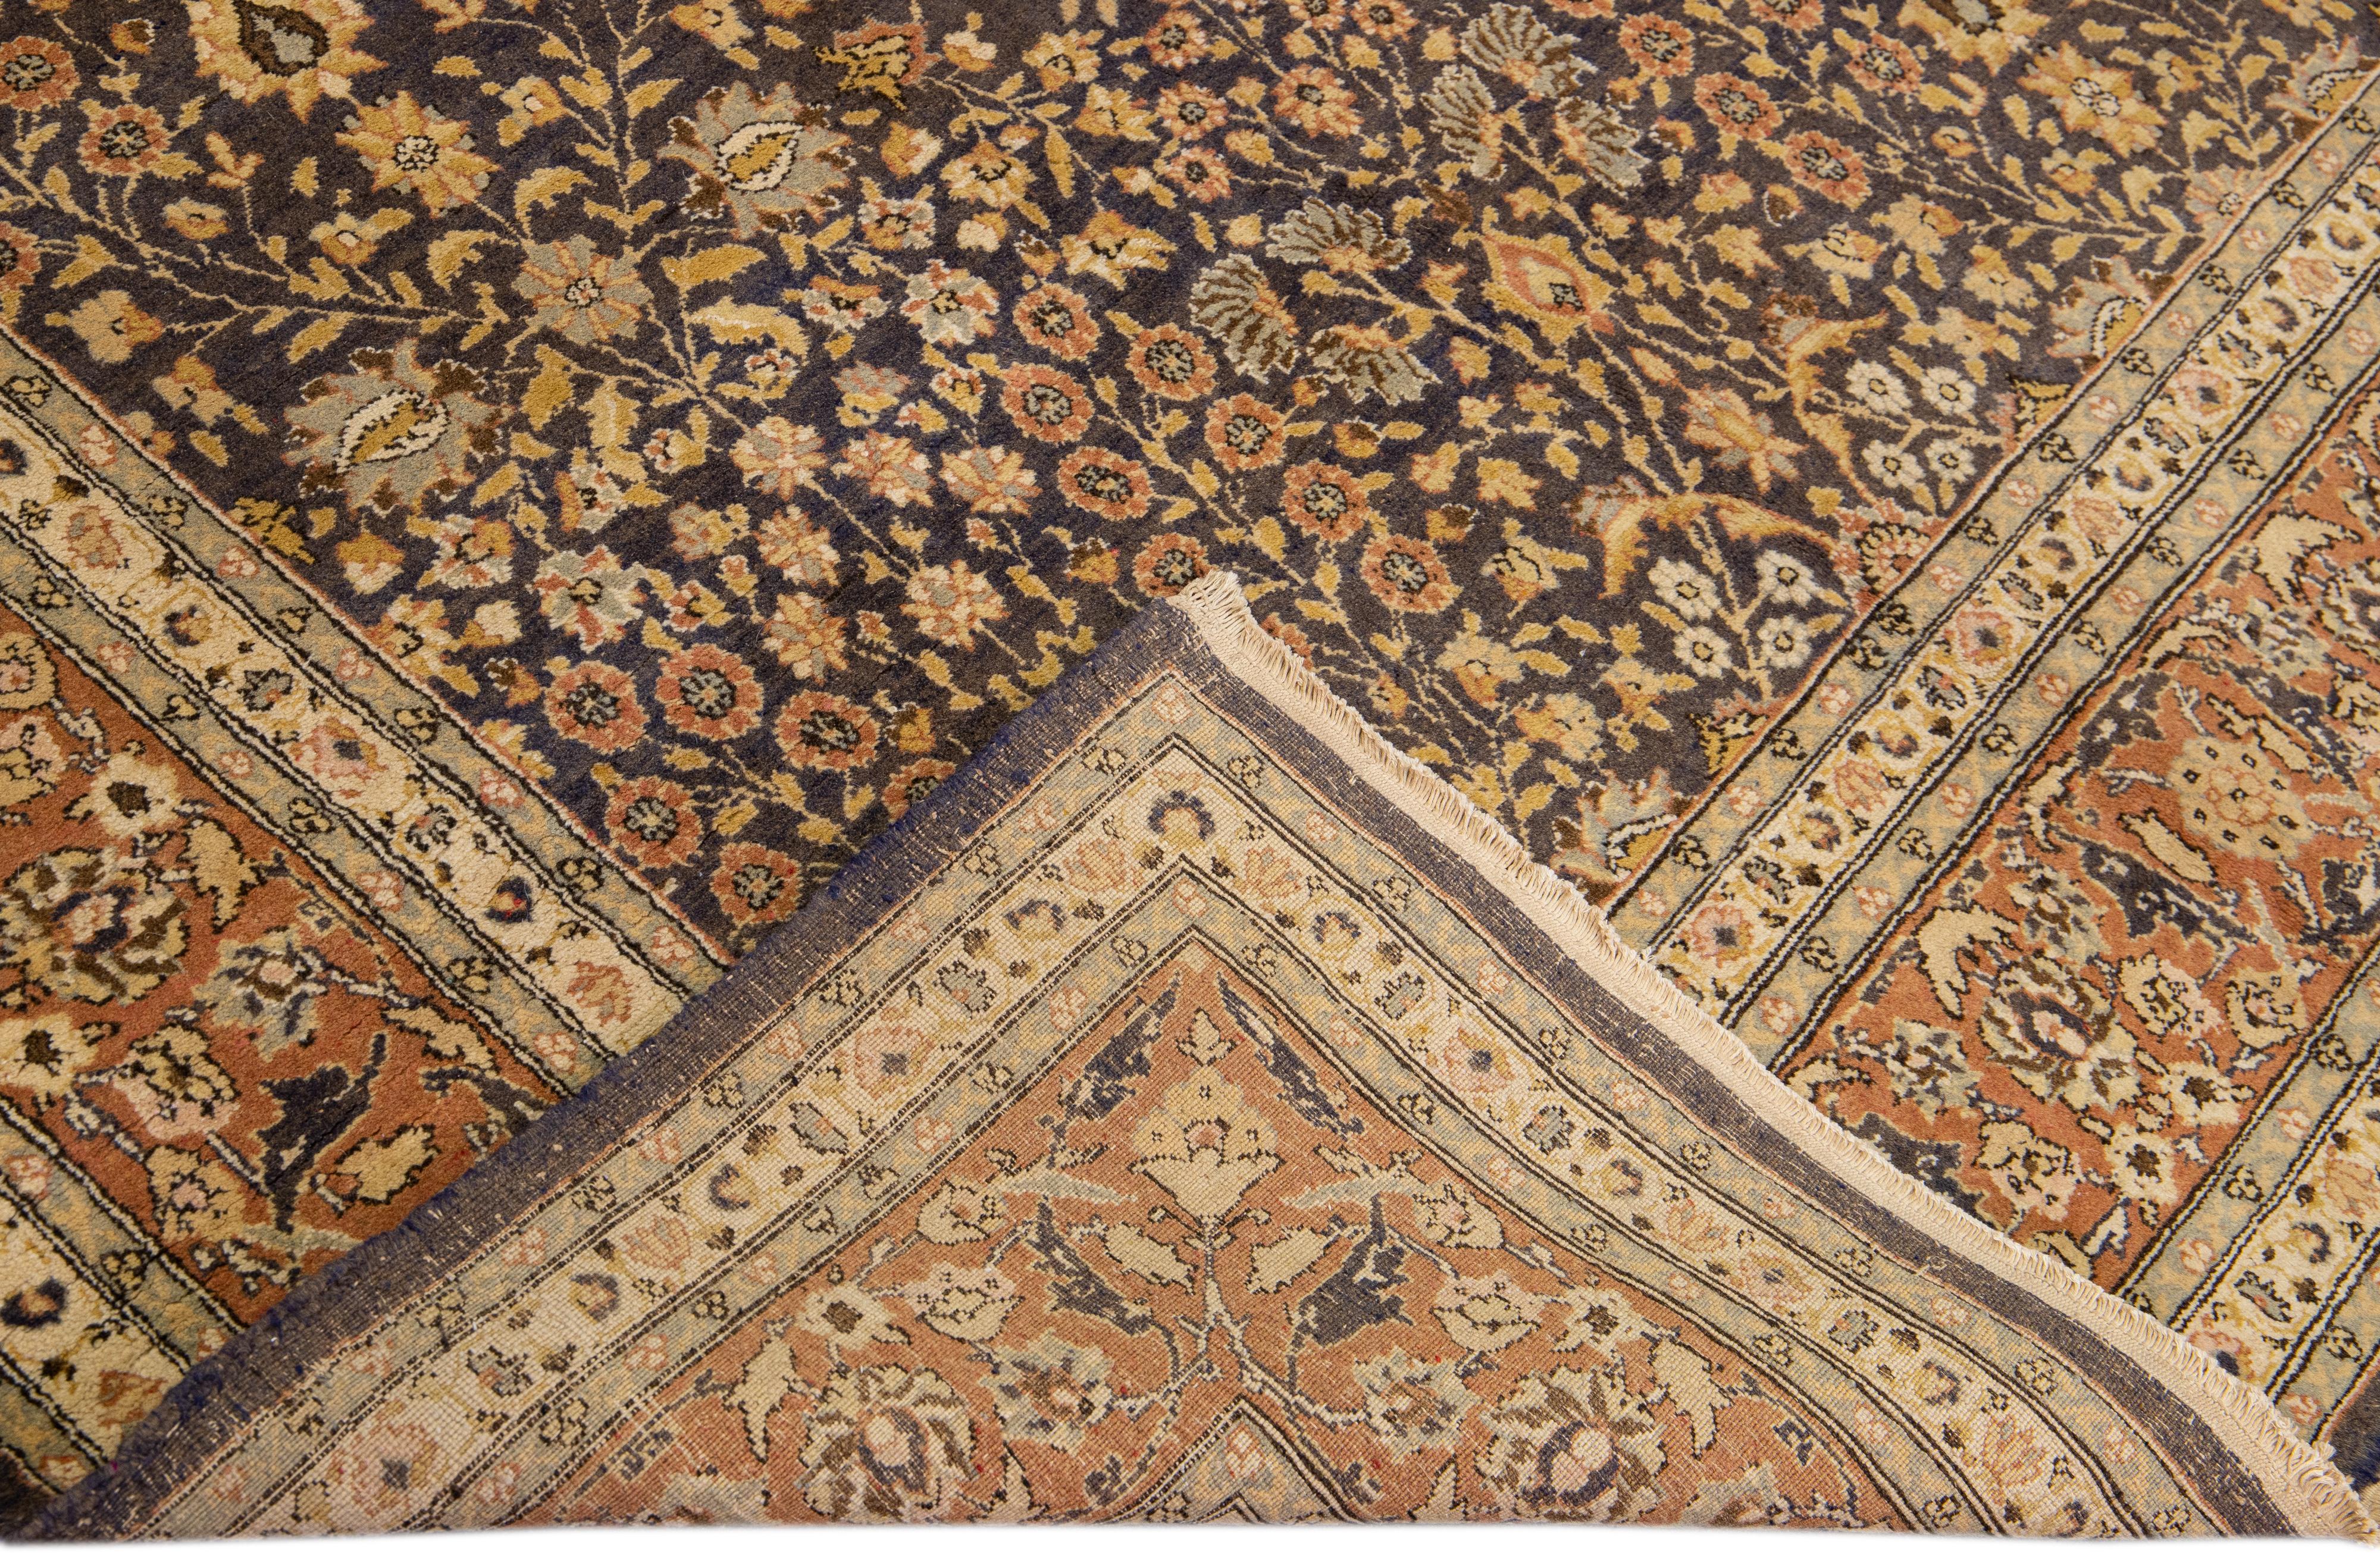 Beautiful Vintage hand-knotted wool rug with a blue field. This Tabriz rug has a rusted frame with yellow and gray accents in a gorgeous all-over geometric floral design.

This rug measures: 5'5